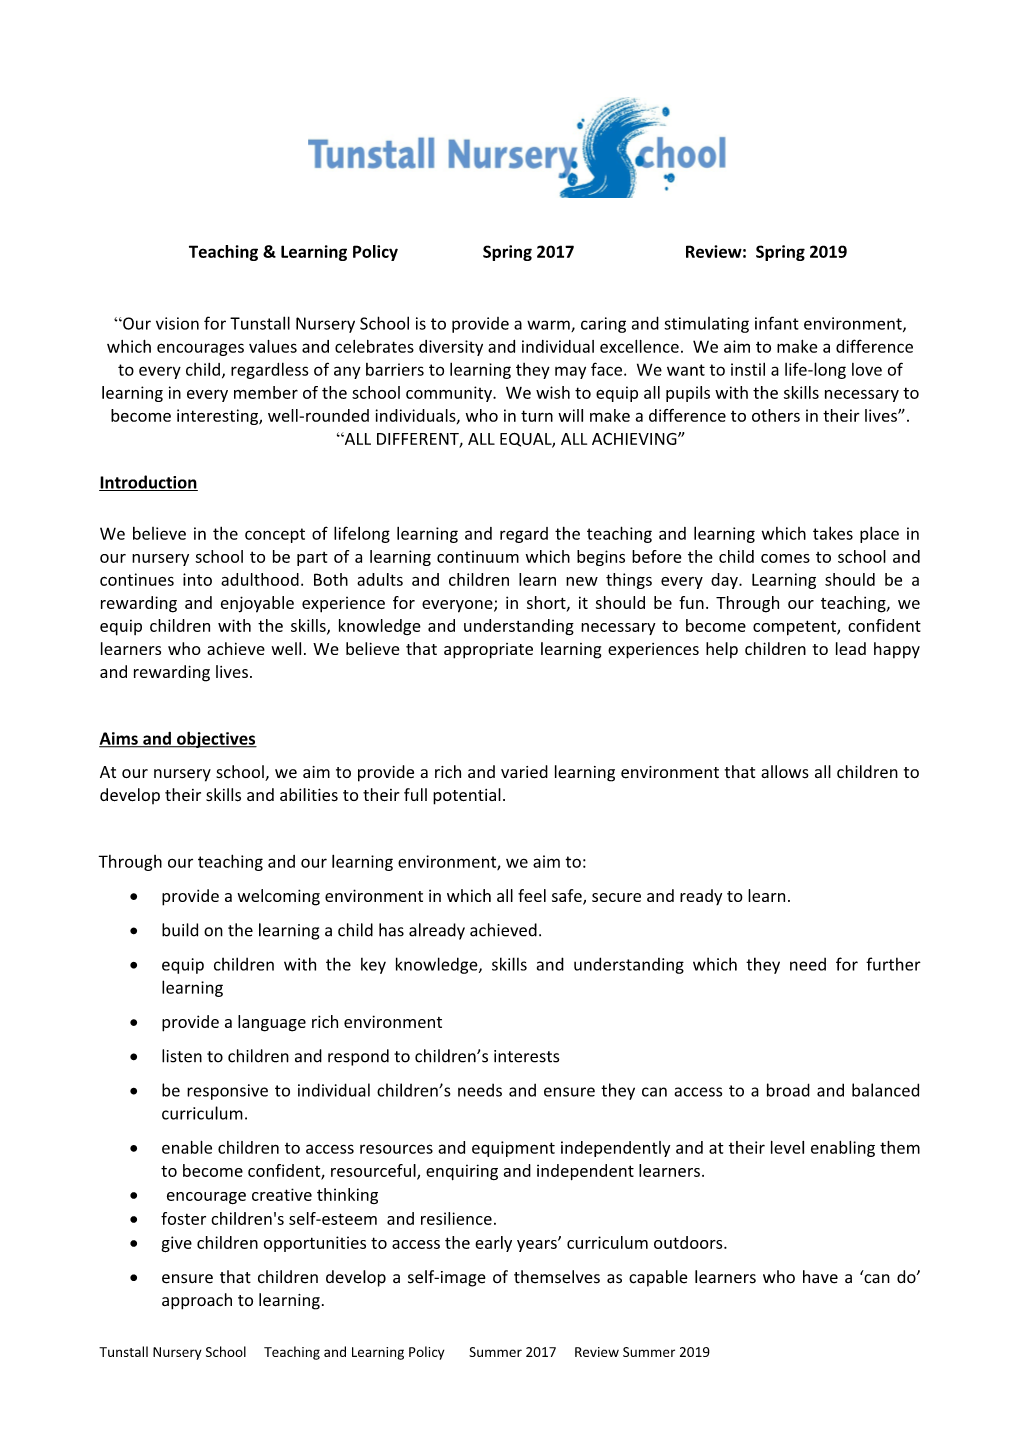 Policy on Teaching and Learning